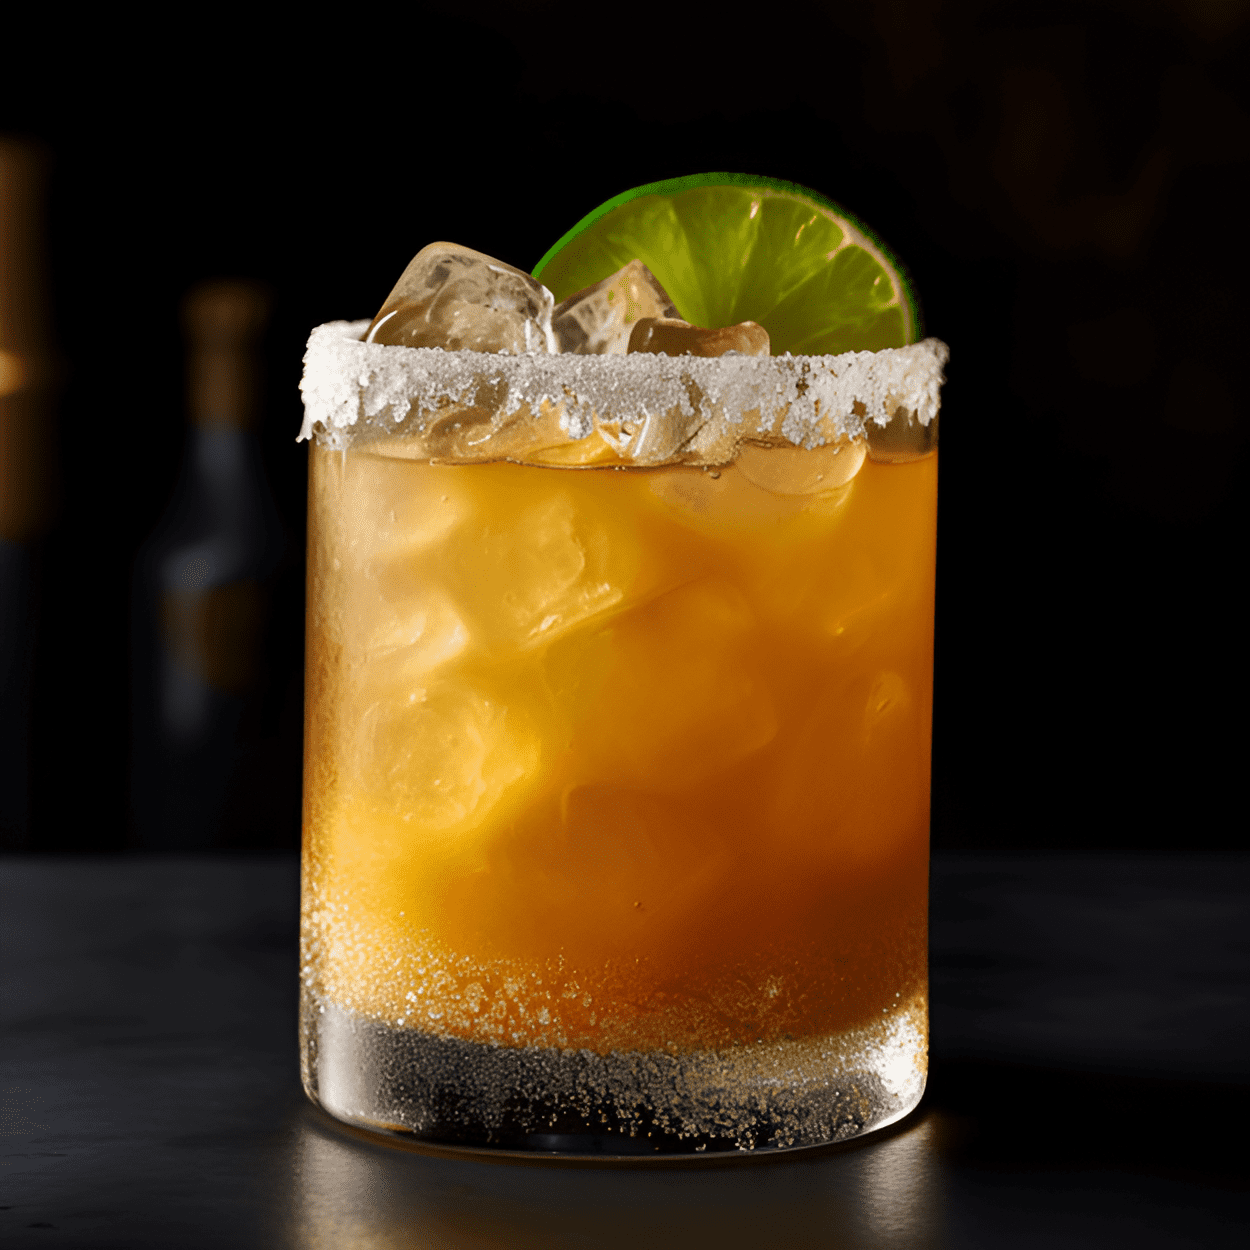 Ancho Reyes Margarita Cocktail Recipe - The Ancho Reyes Margarita is a harmonious blend of sweet, sour, and spicy. The sweetness of the agave syrup, the sourness of the lime juice, and the heat of the Ancho Reyes create a complex and exciting flavor profile.